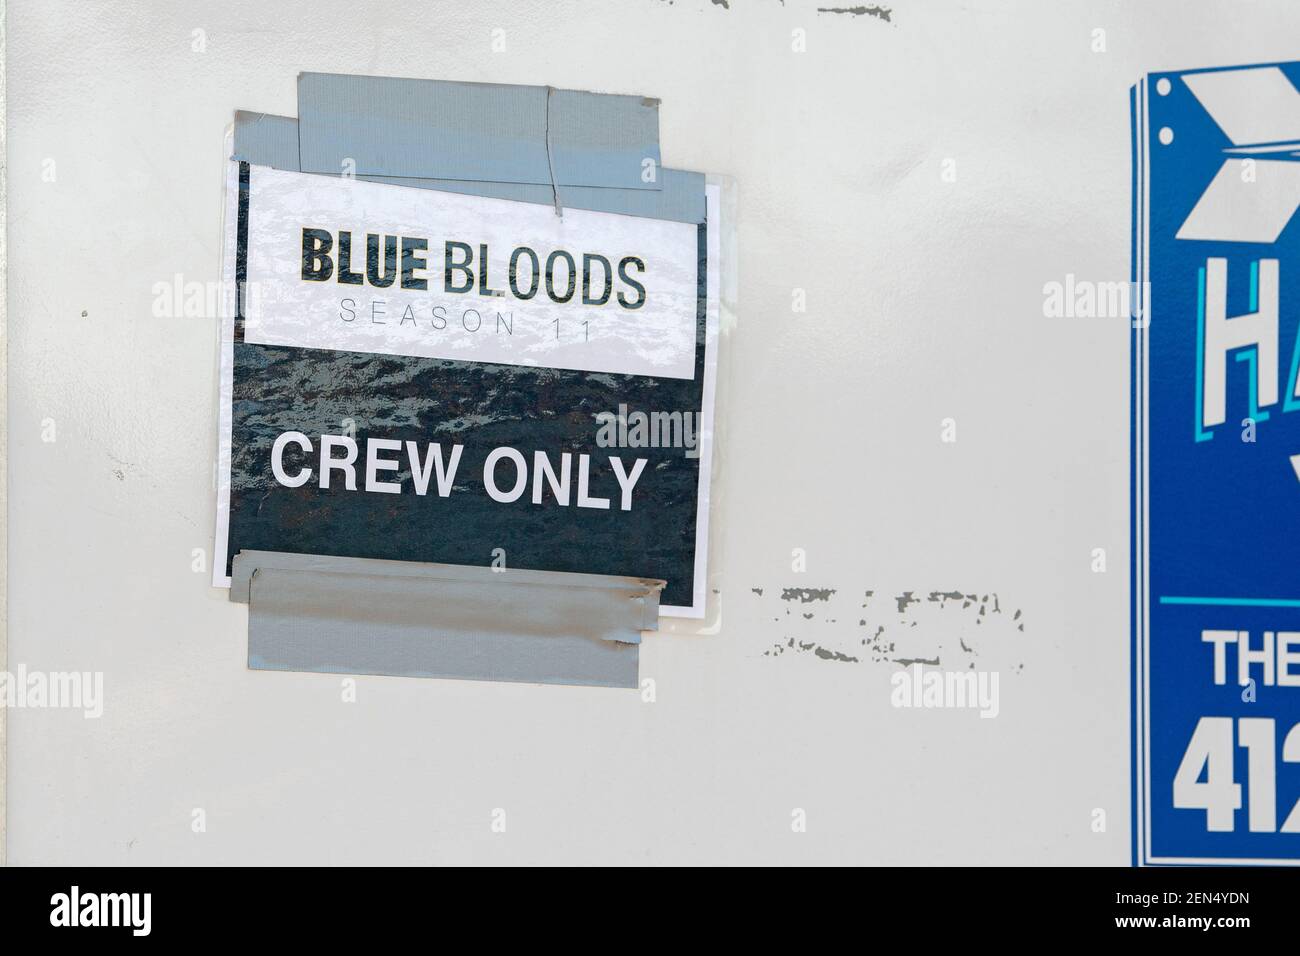 NEW YORK, NY – FEBRUARY 25: Sign reading 'Blue Bloods Season Eleven Crew Only' seen on a film production trailer during the filming of the television show 'Blue Bloods' season eleven in Astoria Park on February 25, 2021 in New York City. Credit: Ron Adar/Alamy Live News Stock Photo